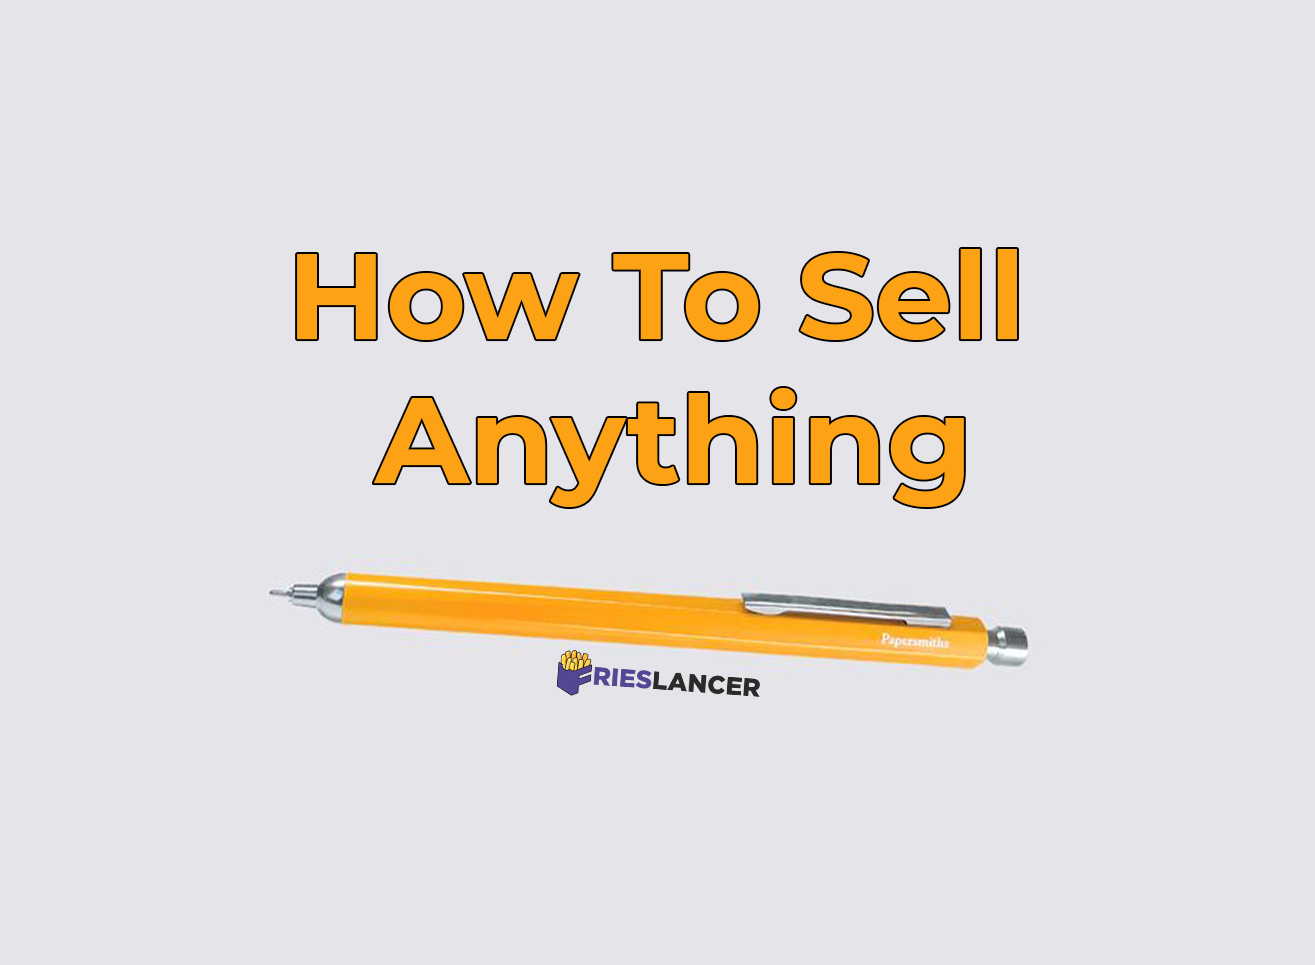 How To Sell Anything. Study of consumer demands